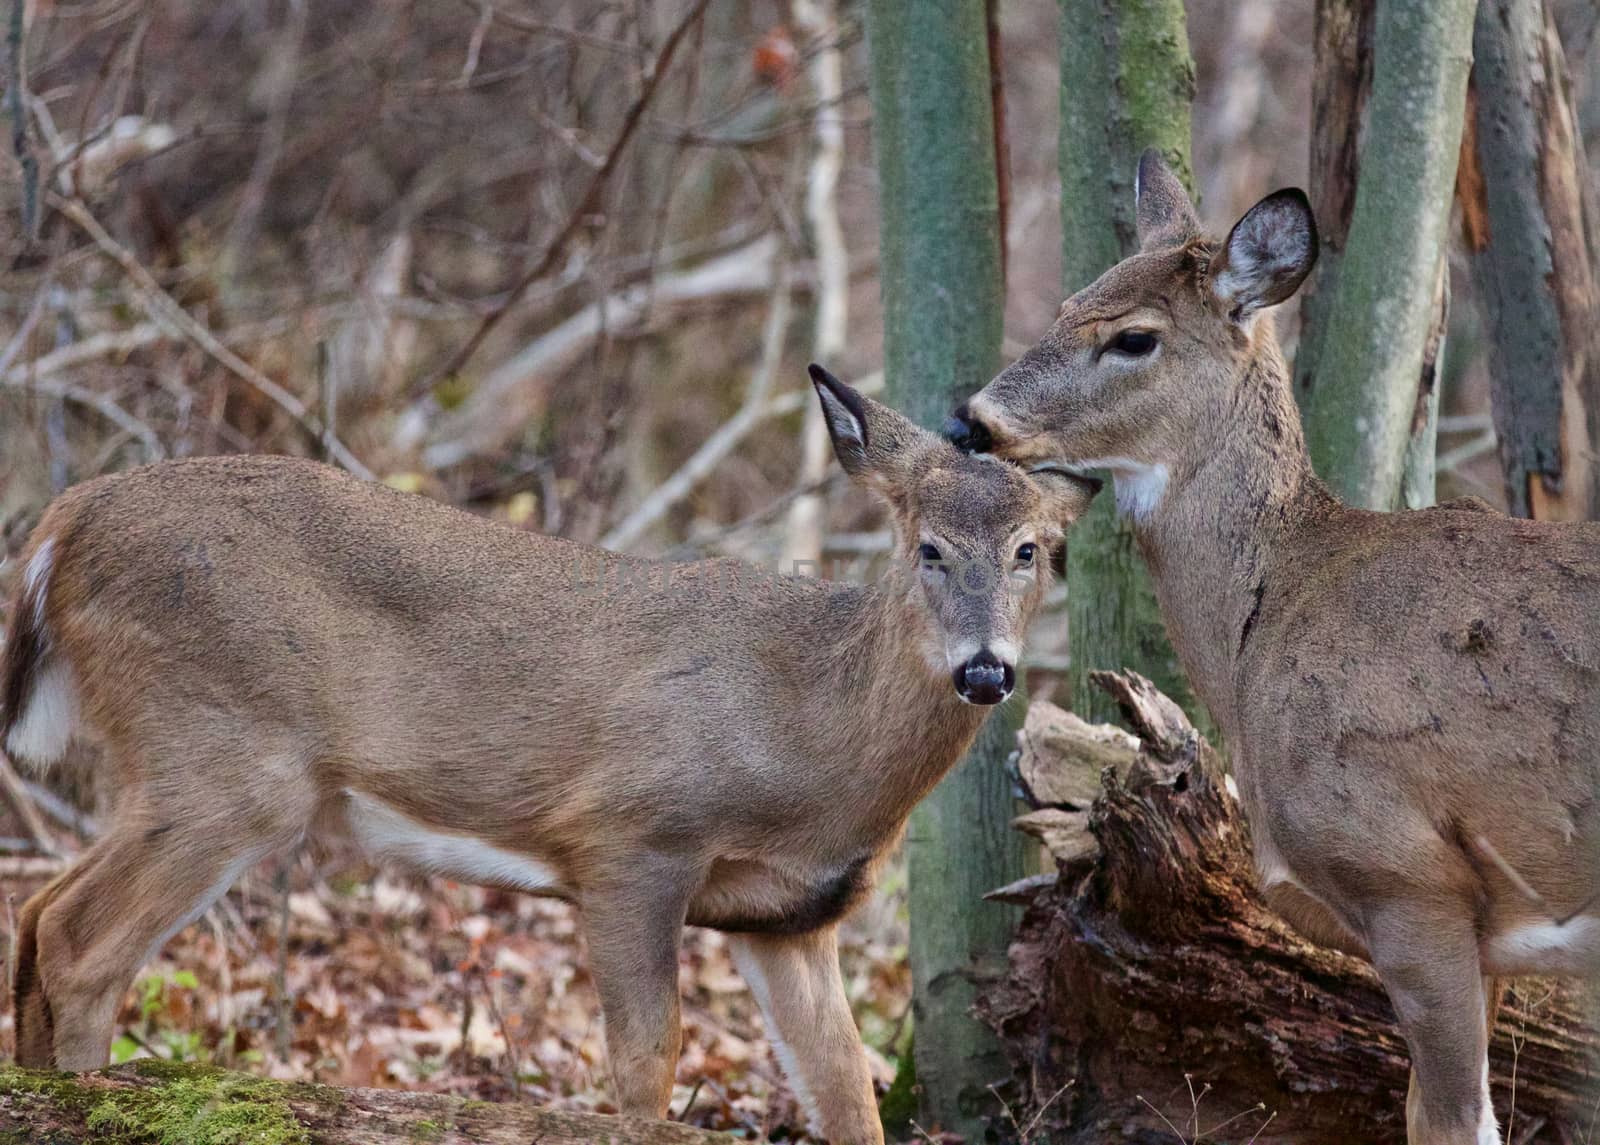 Photo of the cute young deer and his mom in the forest